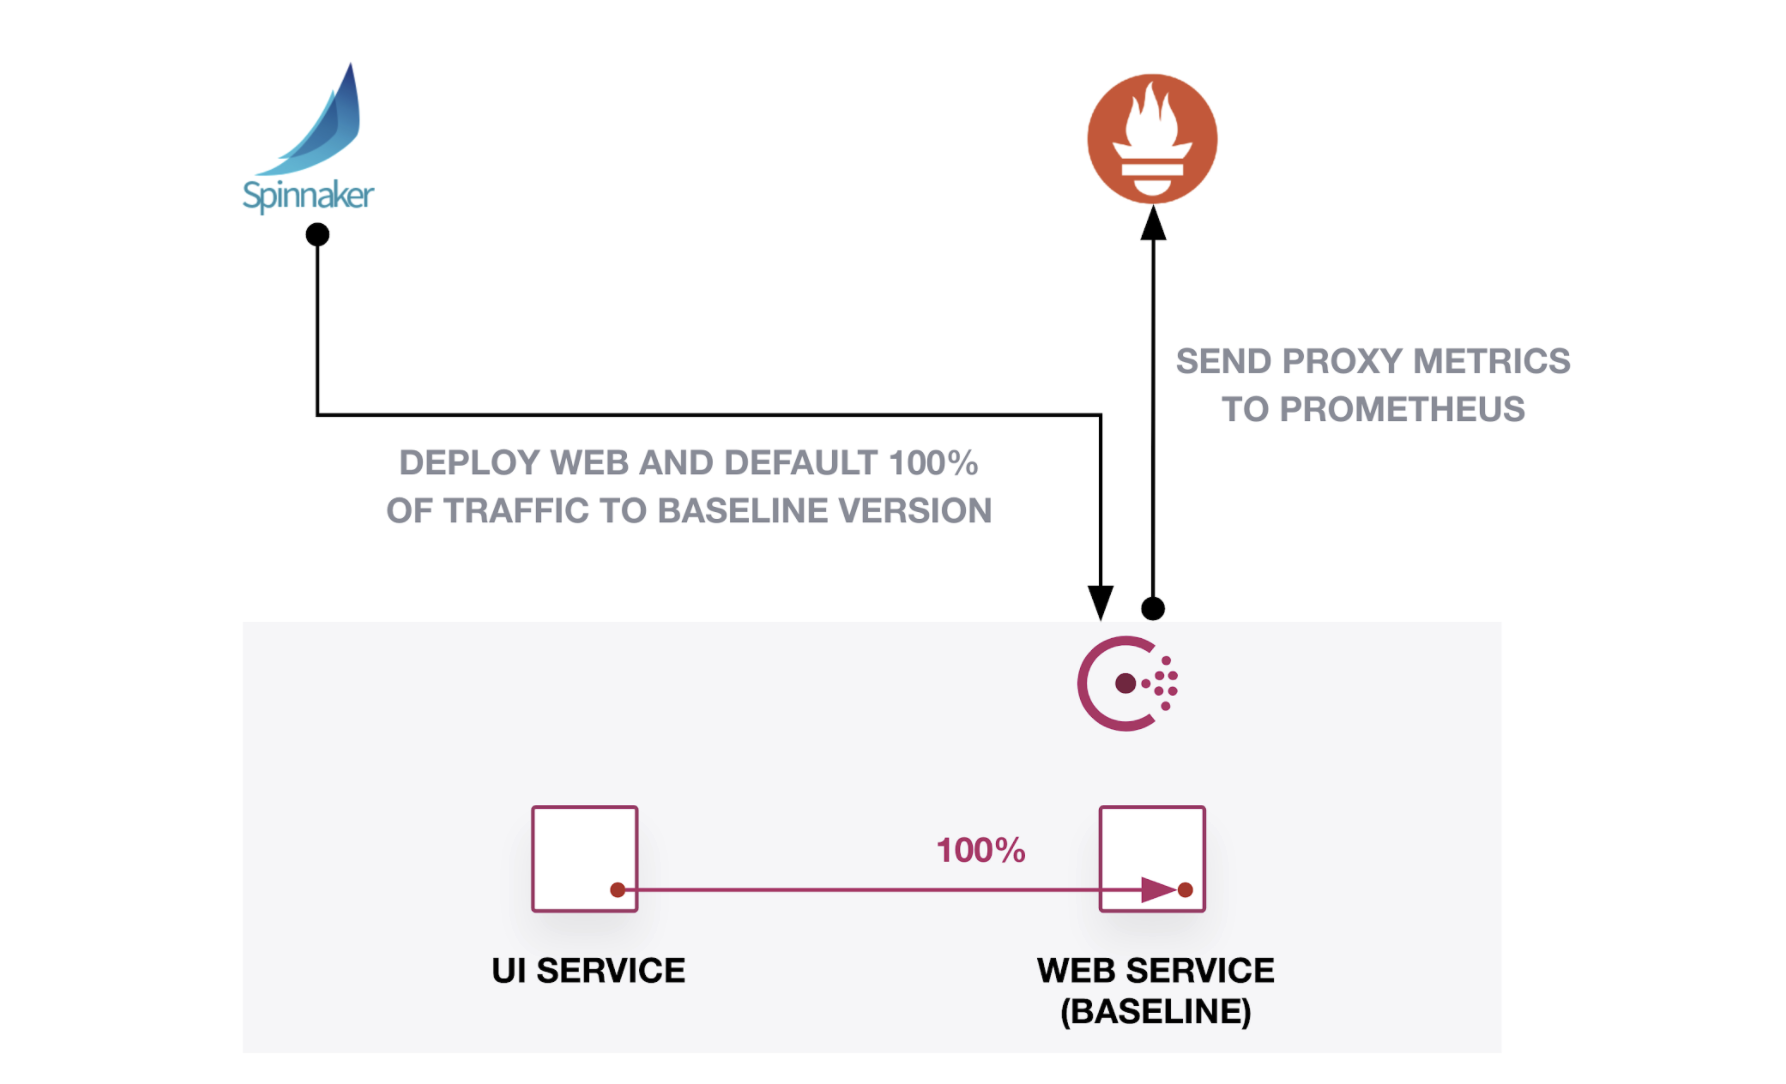 All traffic from “ui” service goes to “web” service